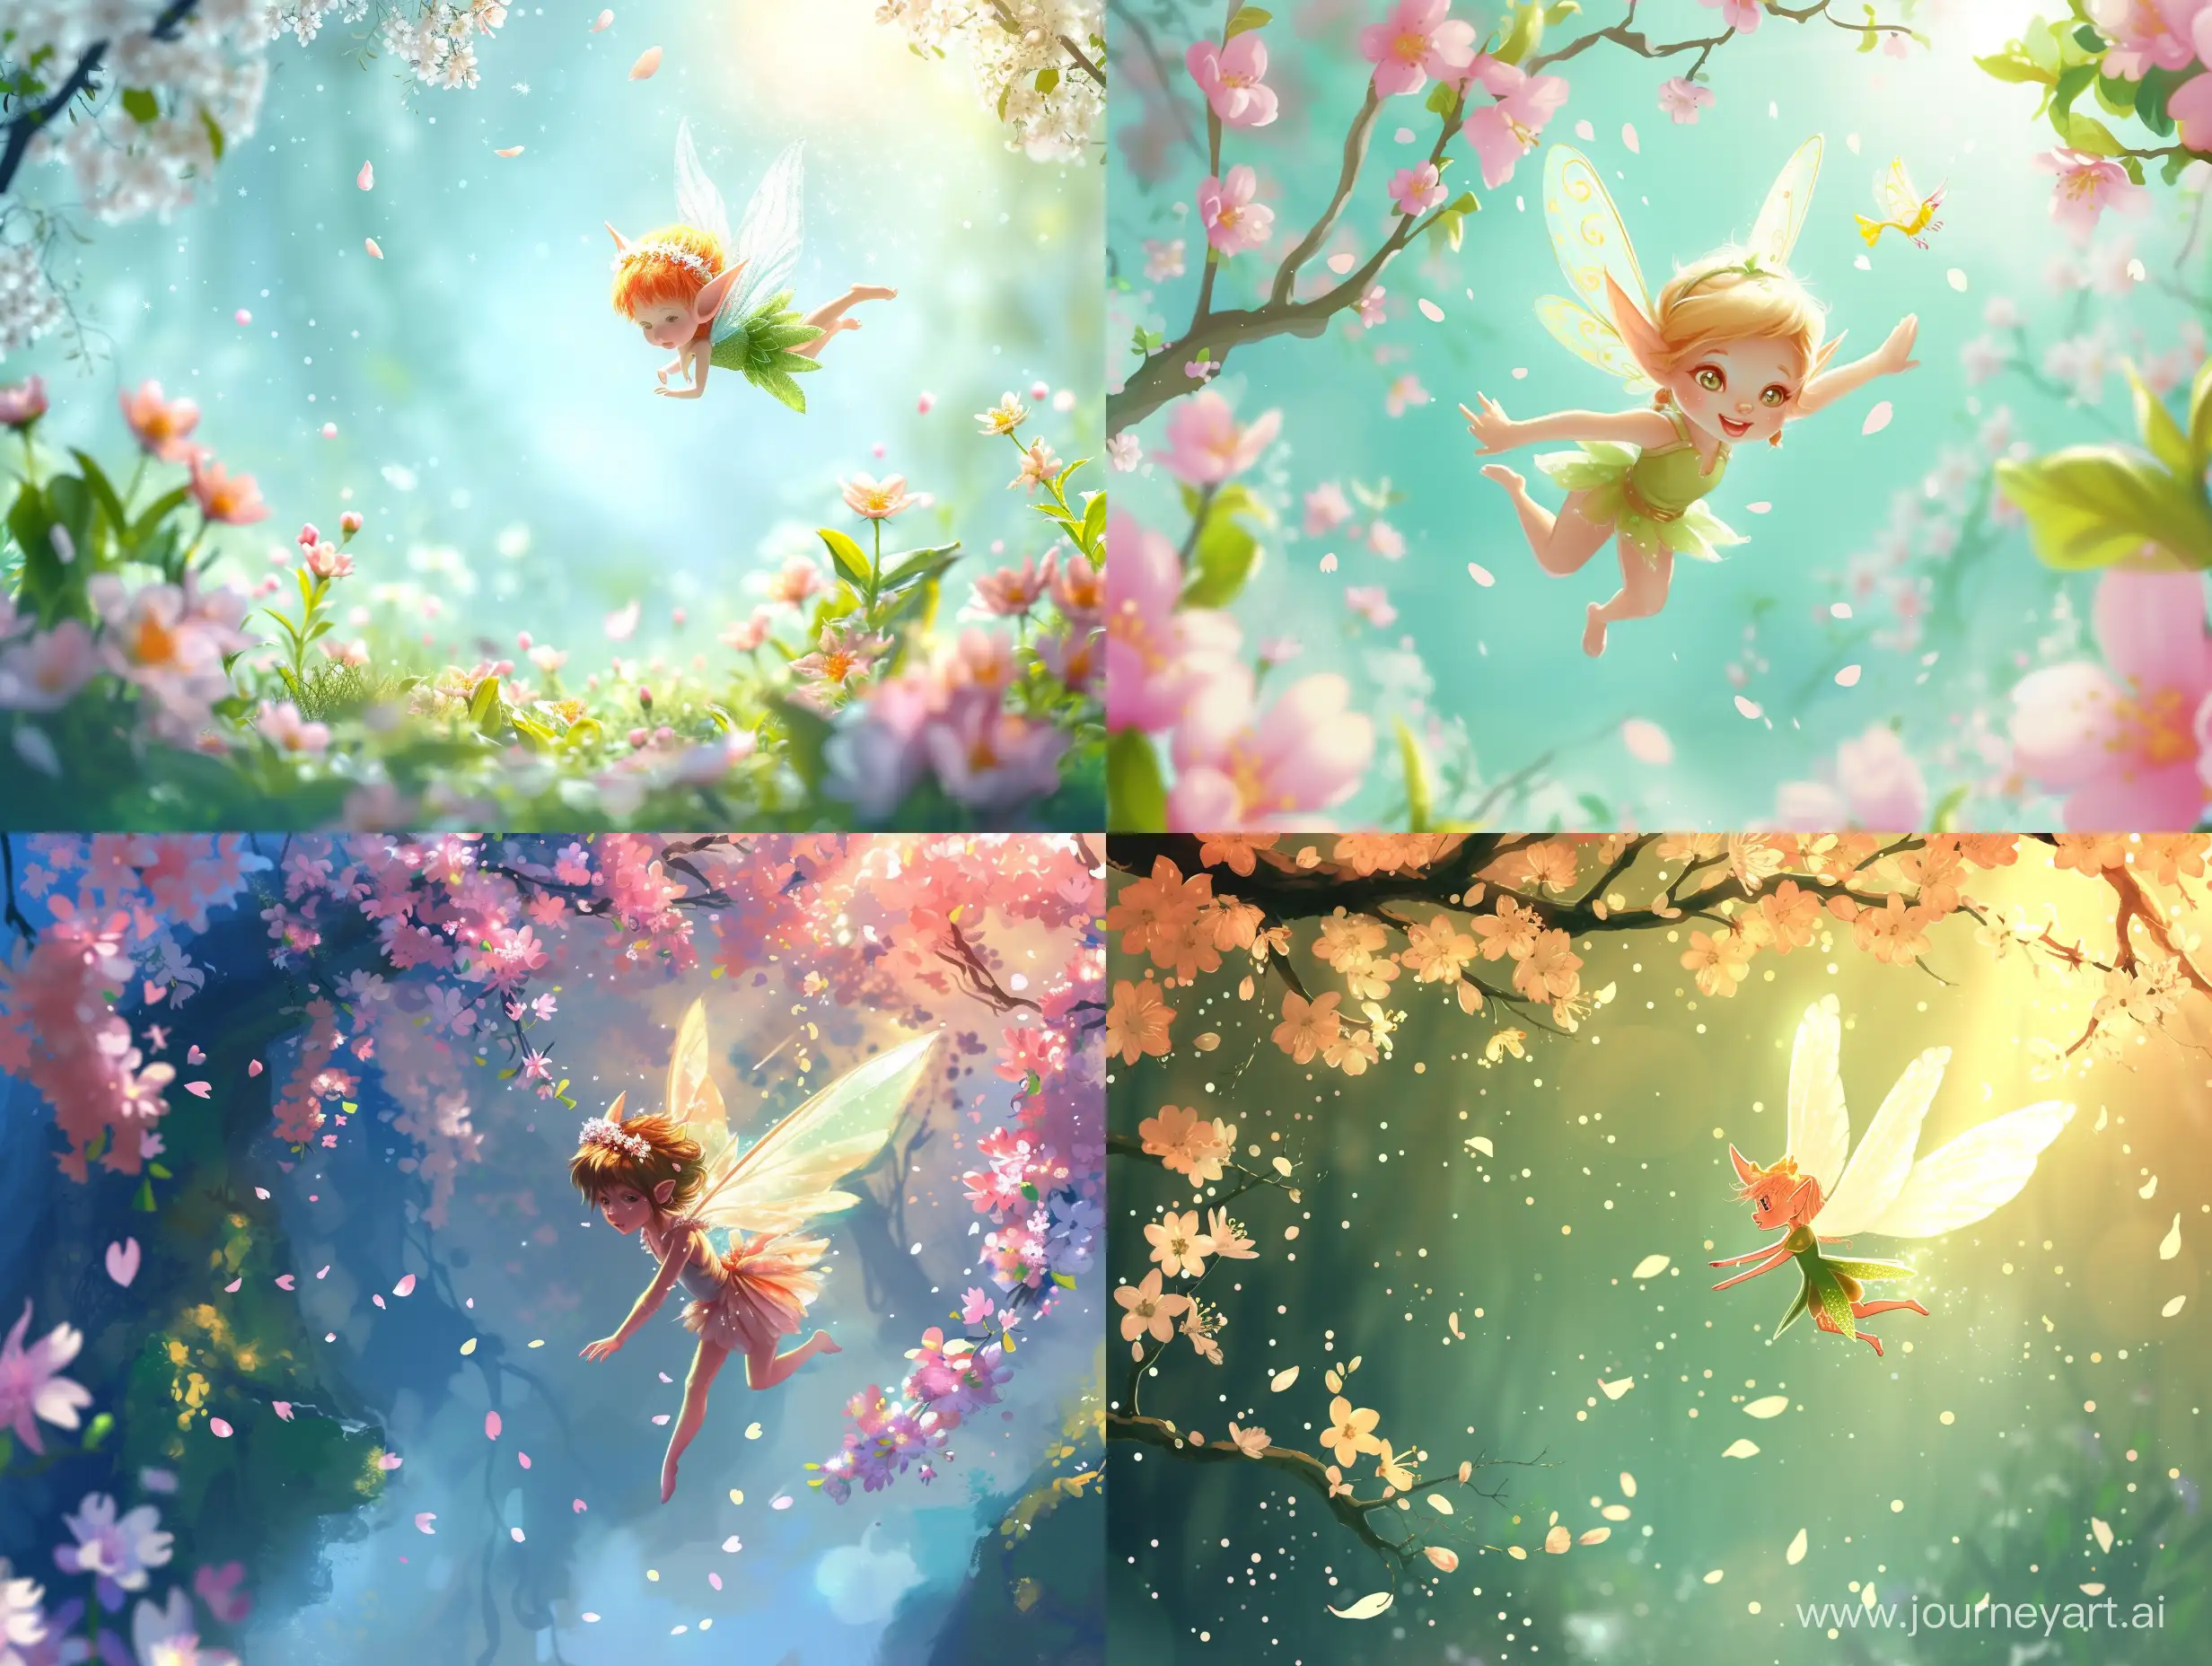 Cute pixie flying over whismical blooming forest